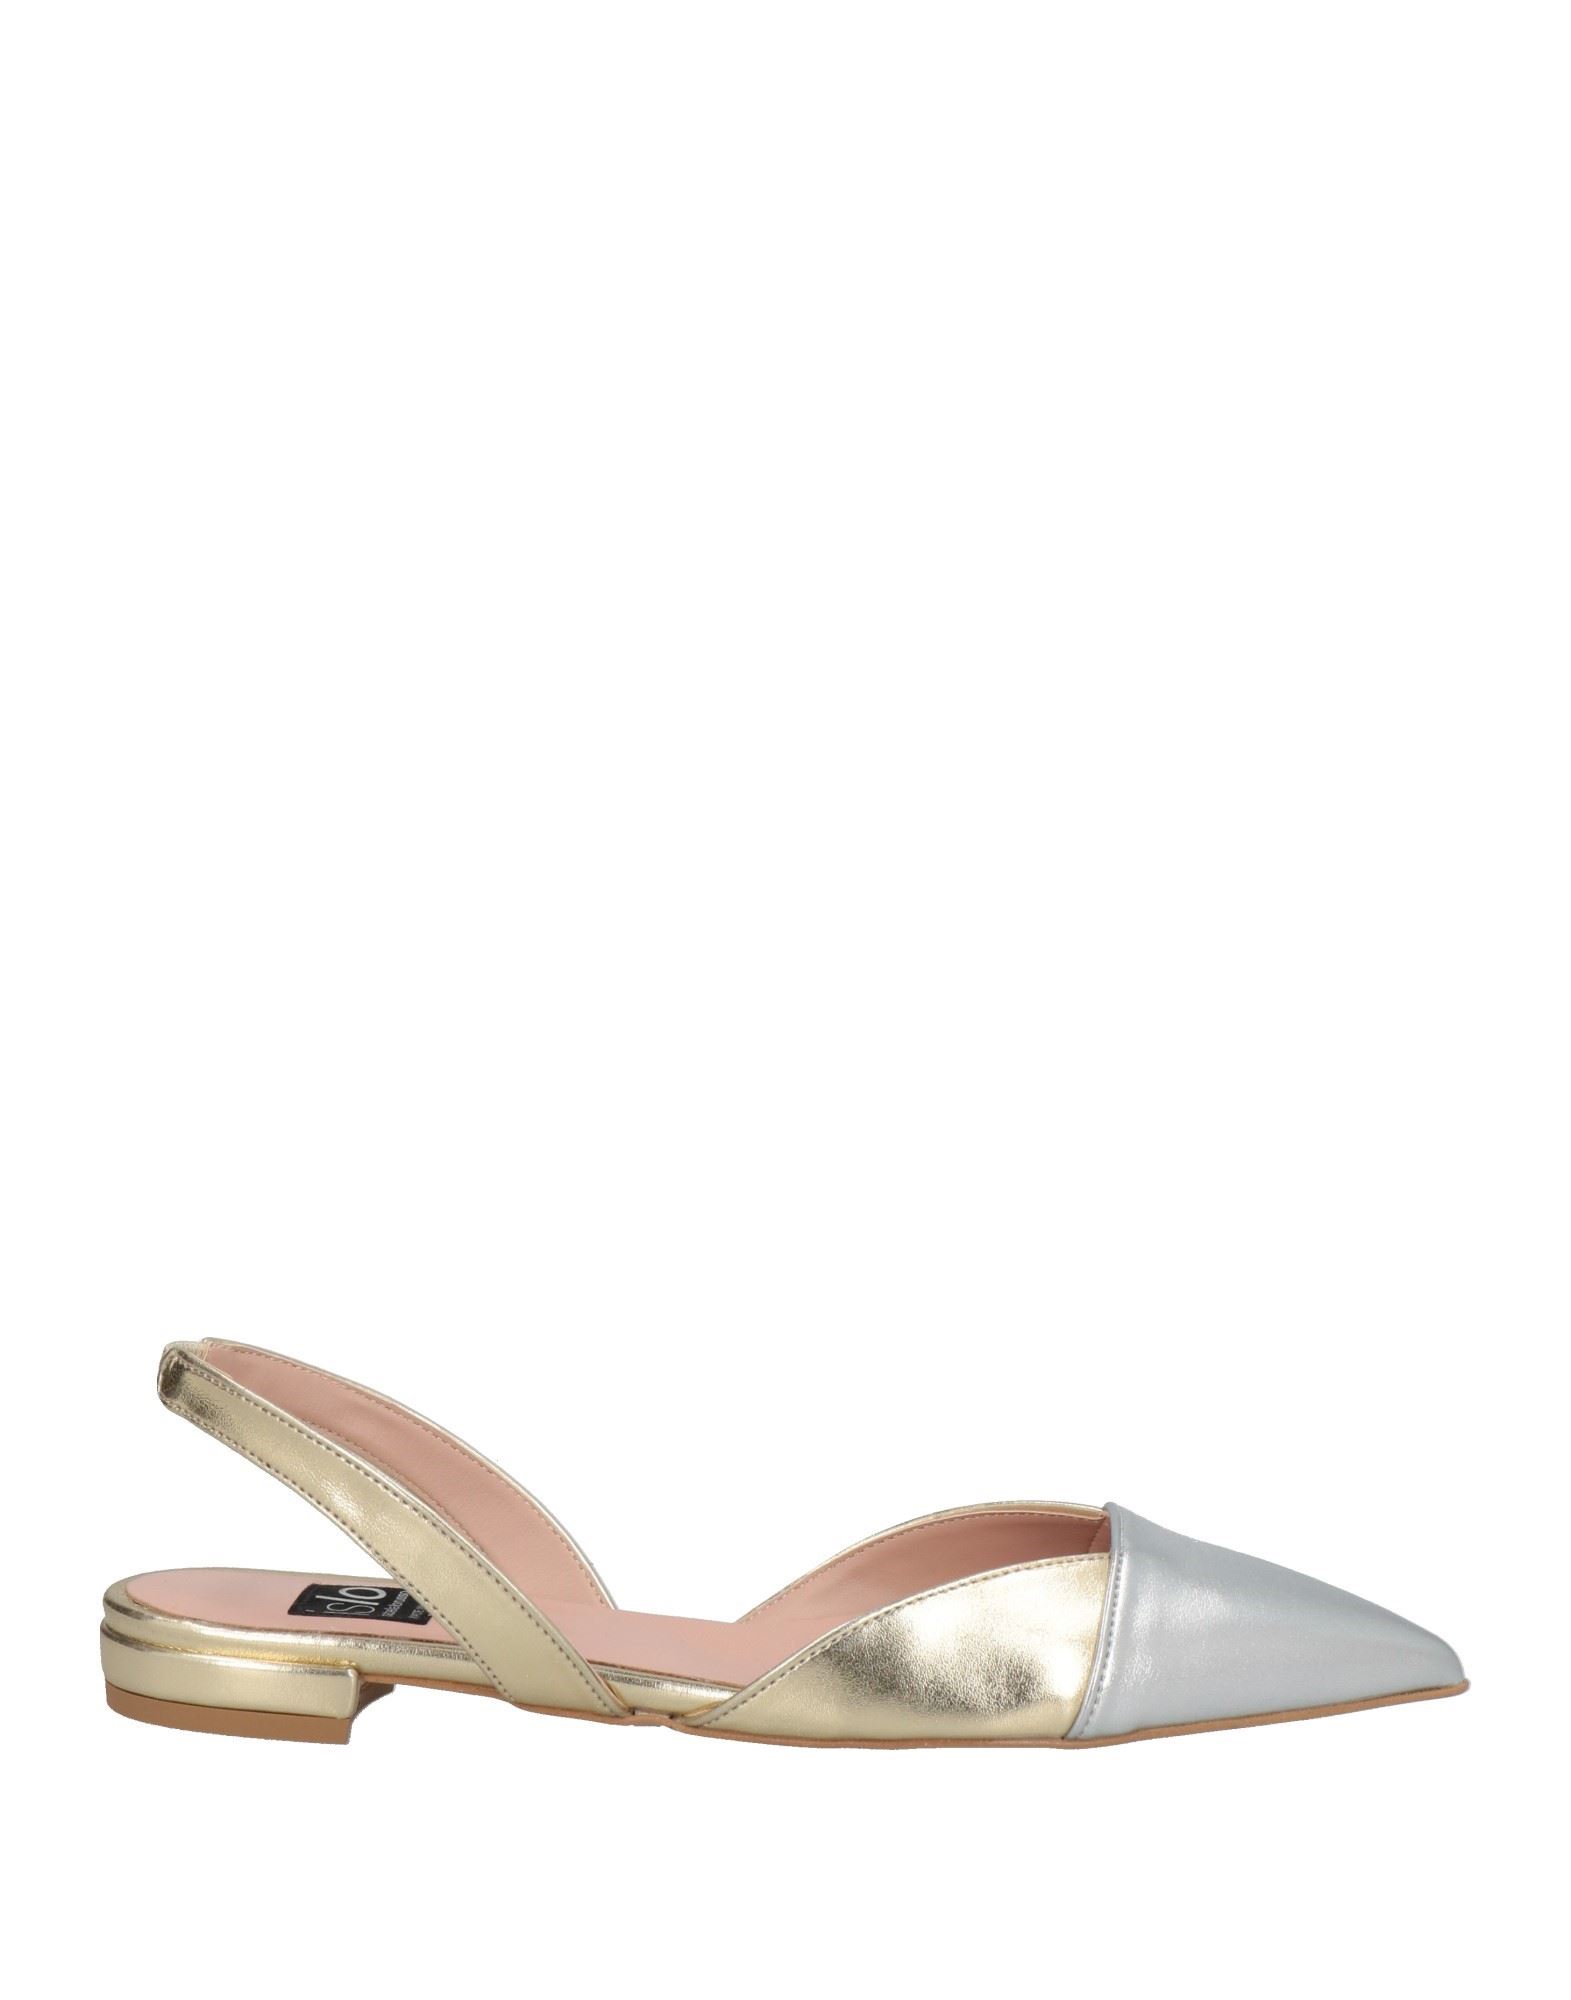 Islo Isabella Lorusso Ballet Flats In Silver